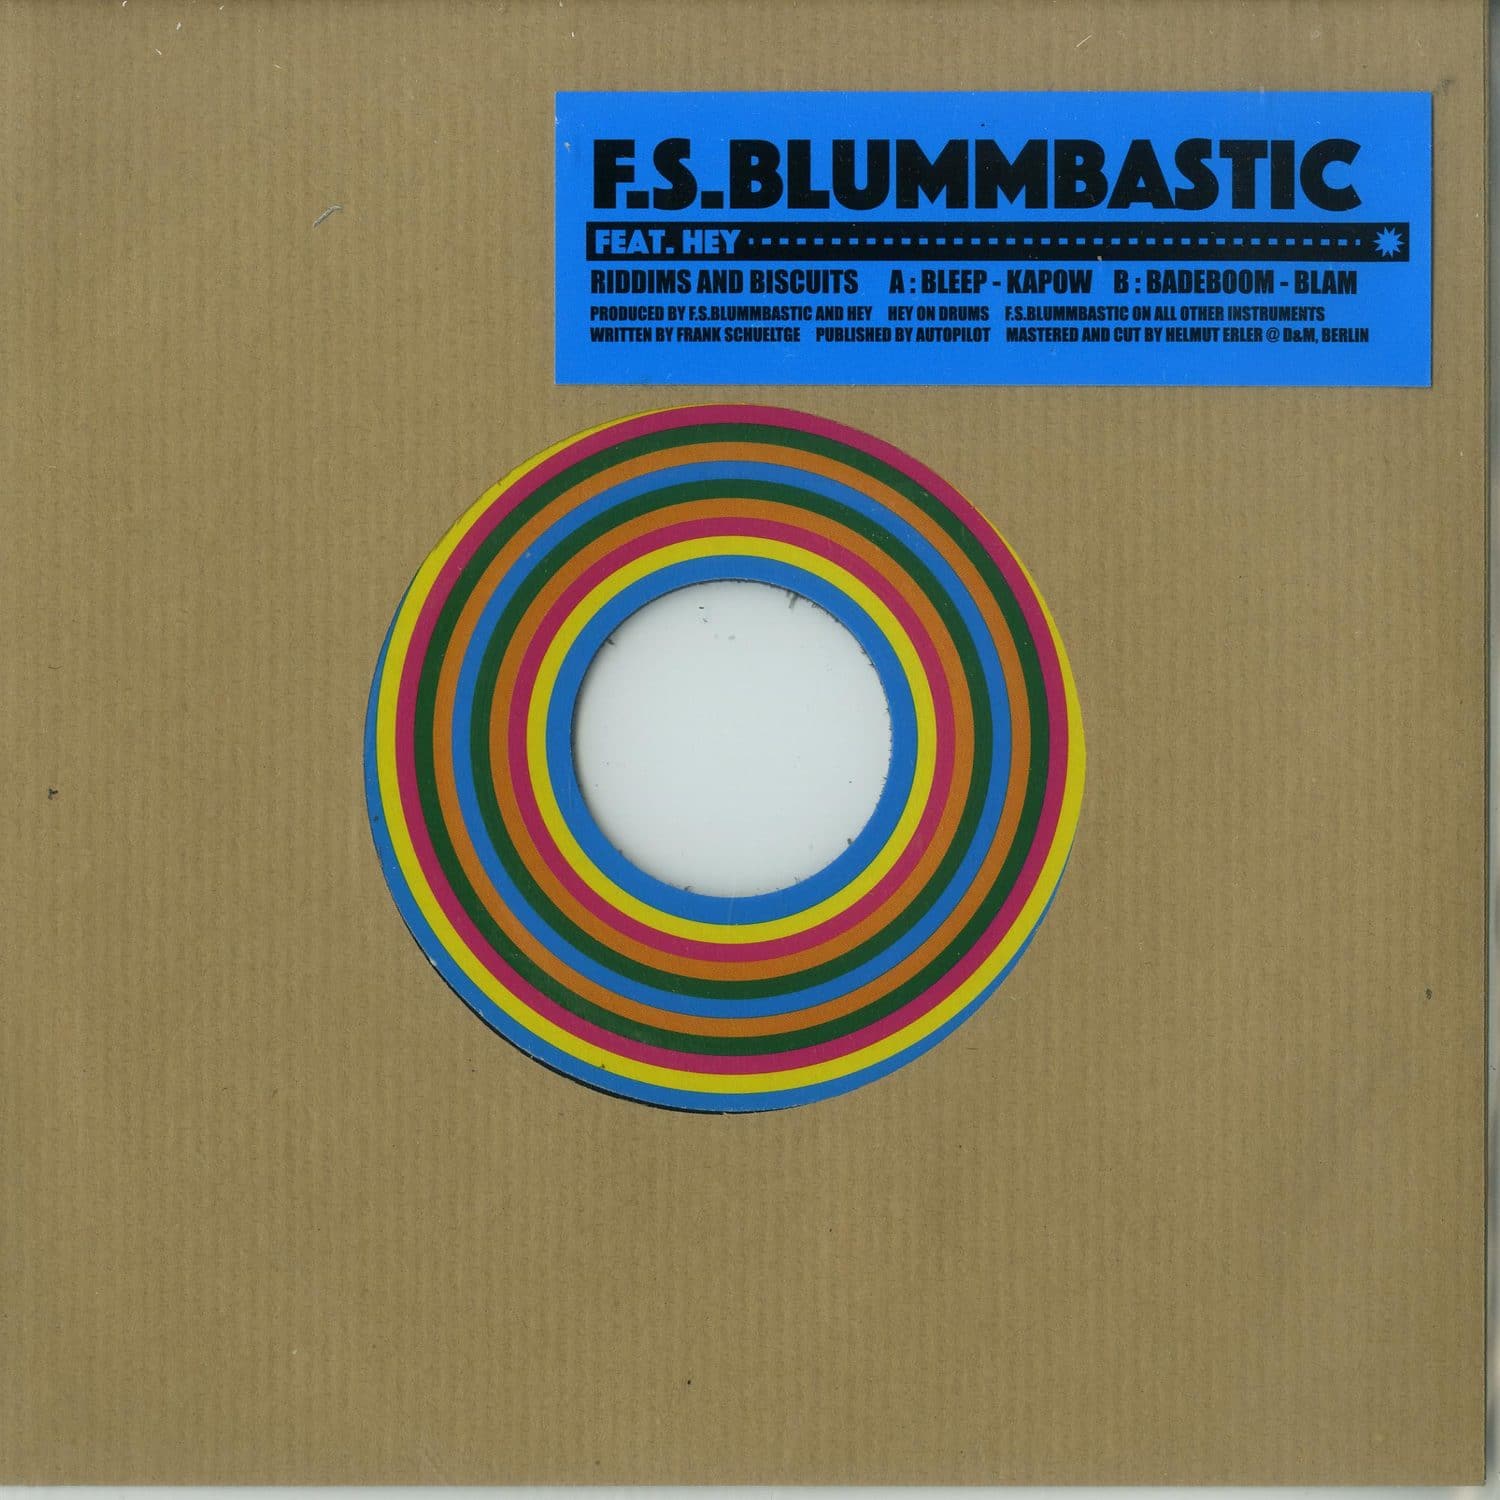 F.S. Blummbastic Feat. Hey - RIDDIMS AND BISCUITS 